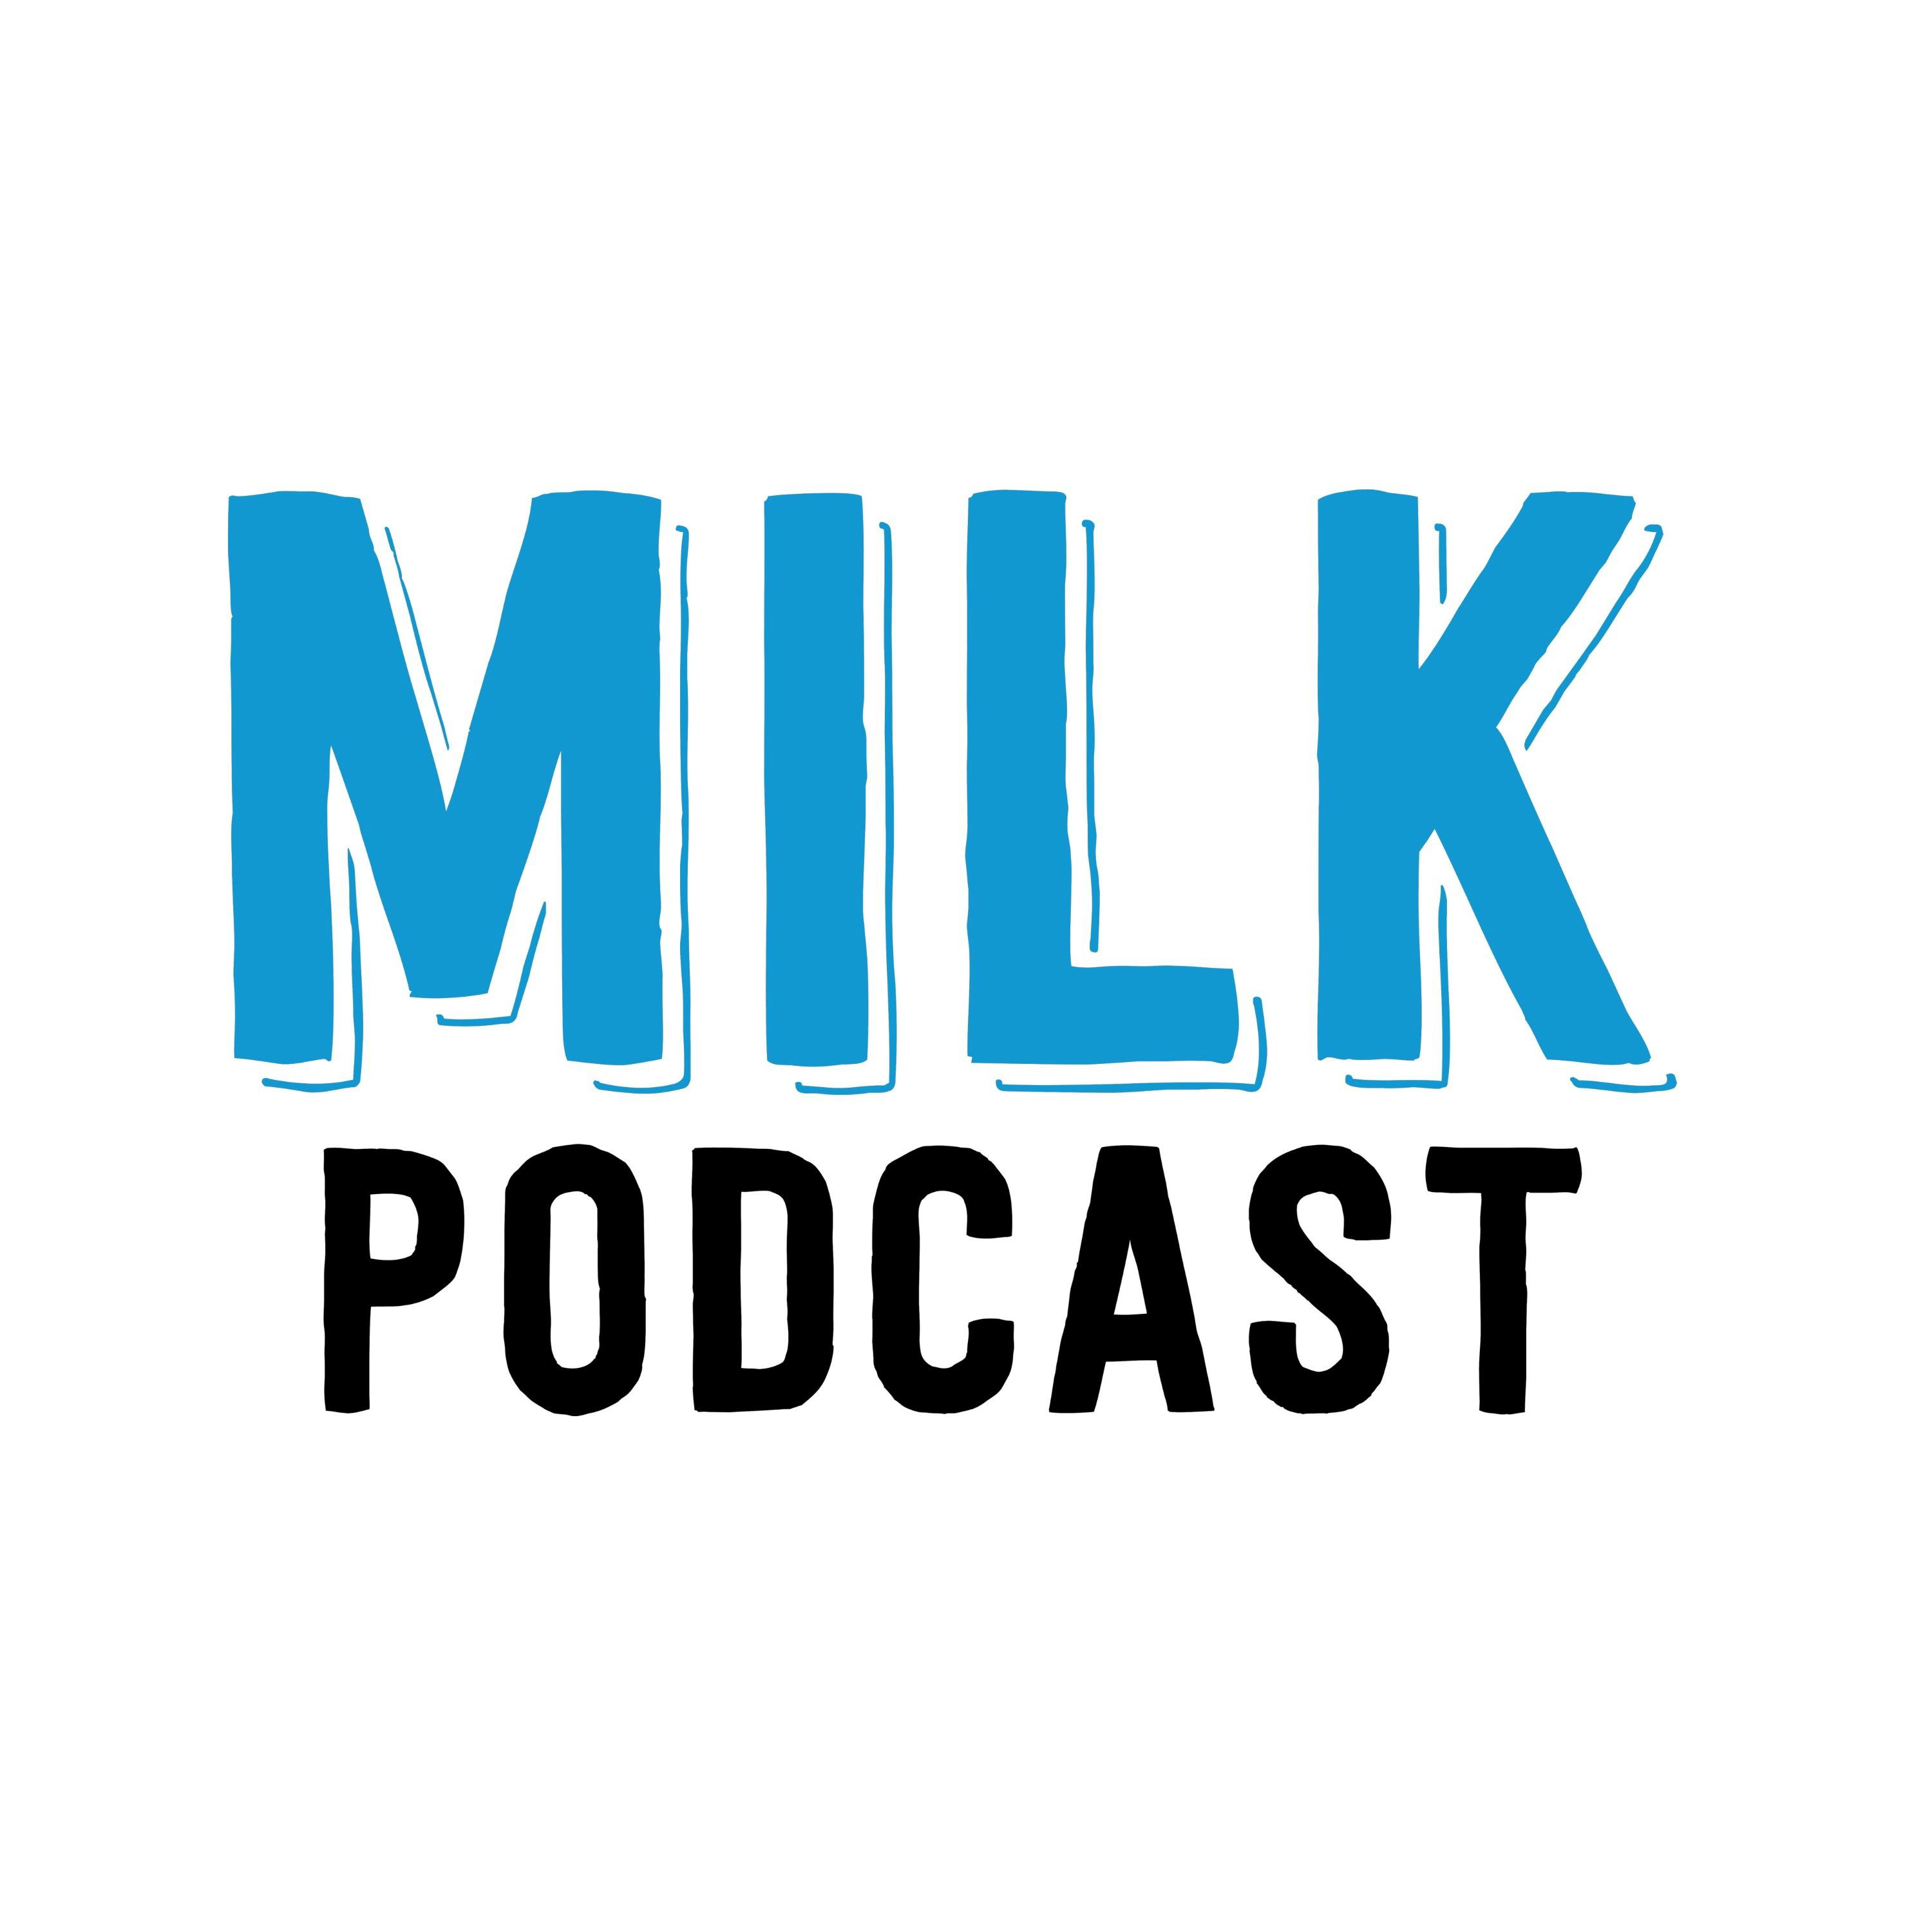 MILK Podcast: The Loss Season, Episode 12: Banksy Angels, Frolicking Dolphins, and Our Friend Heather